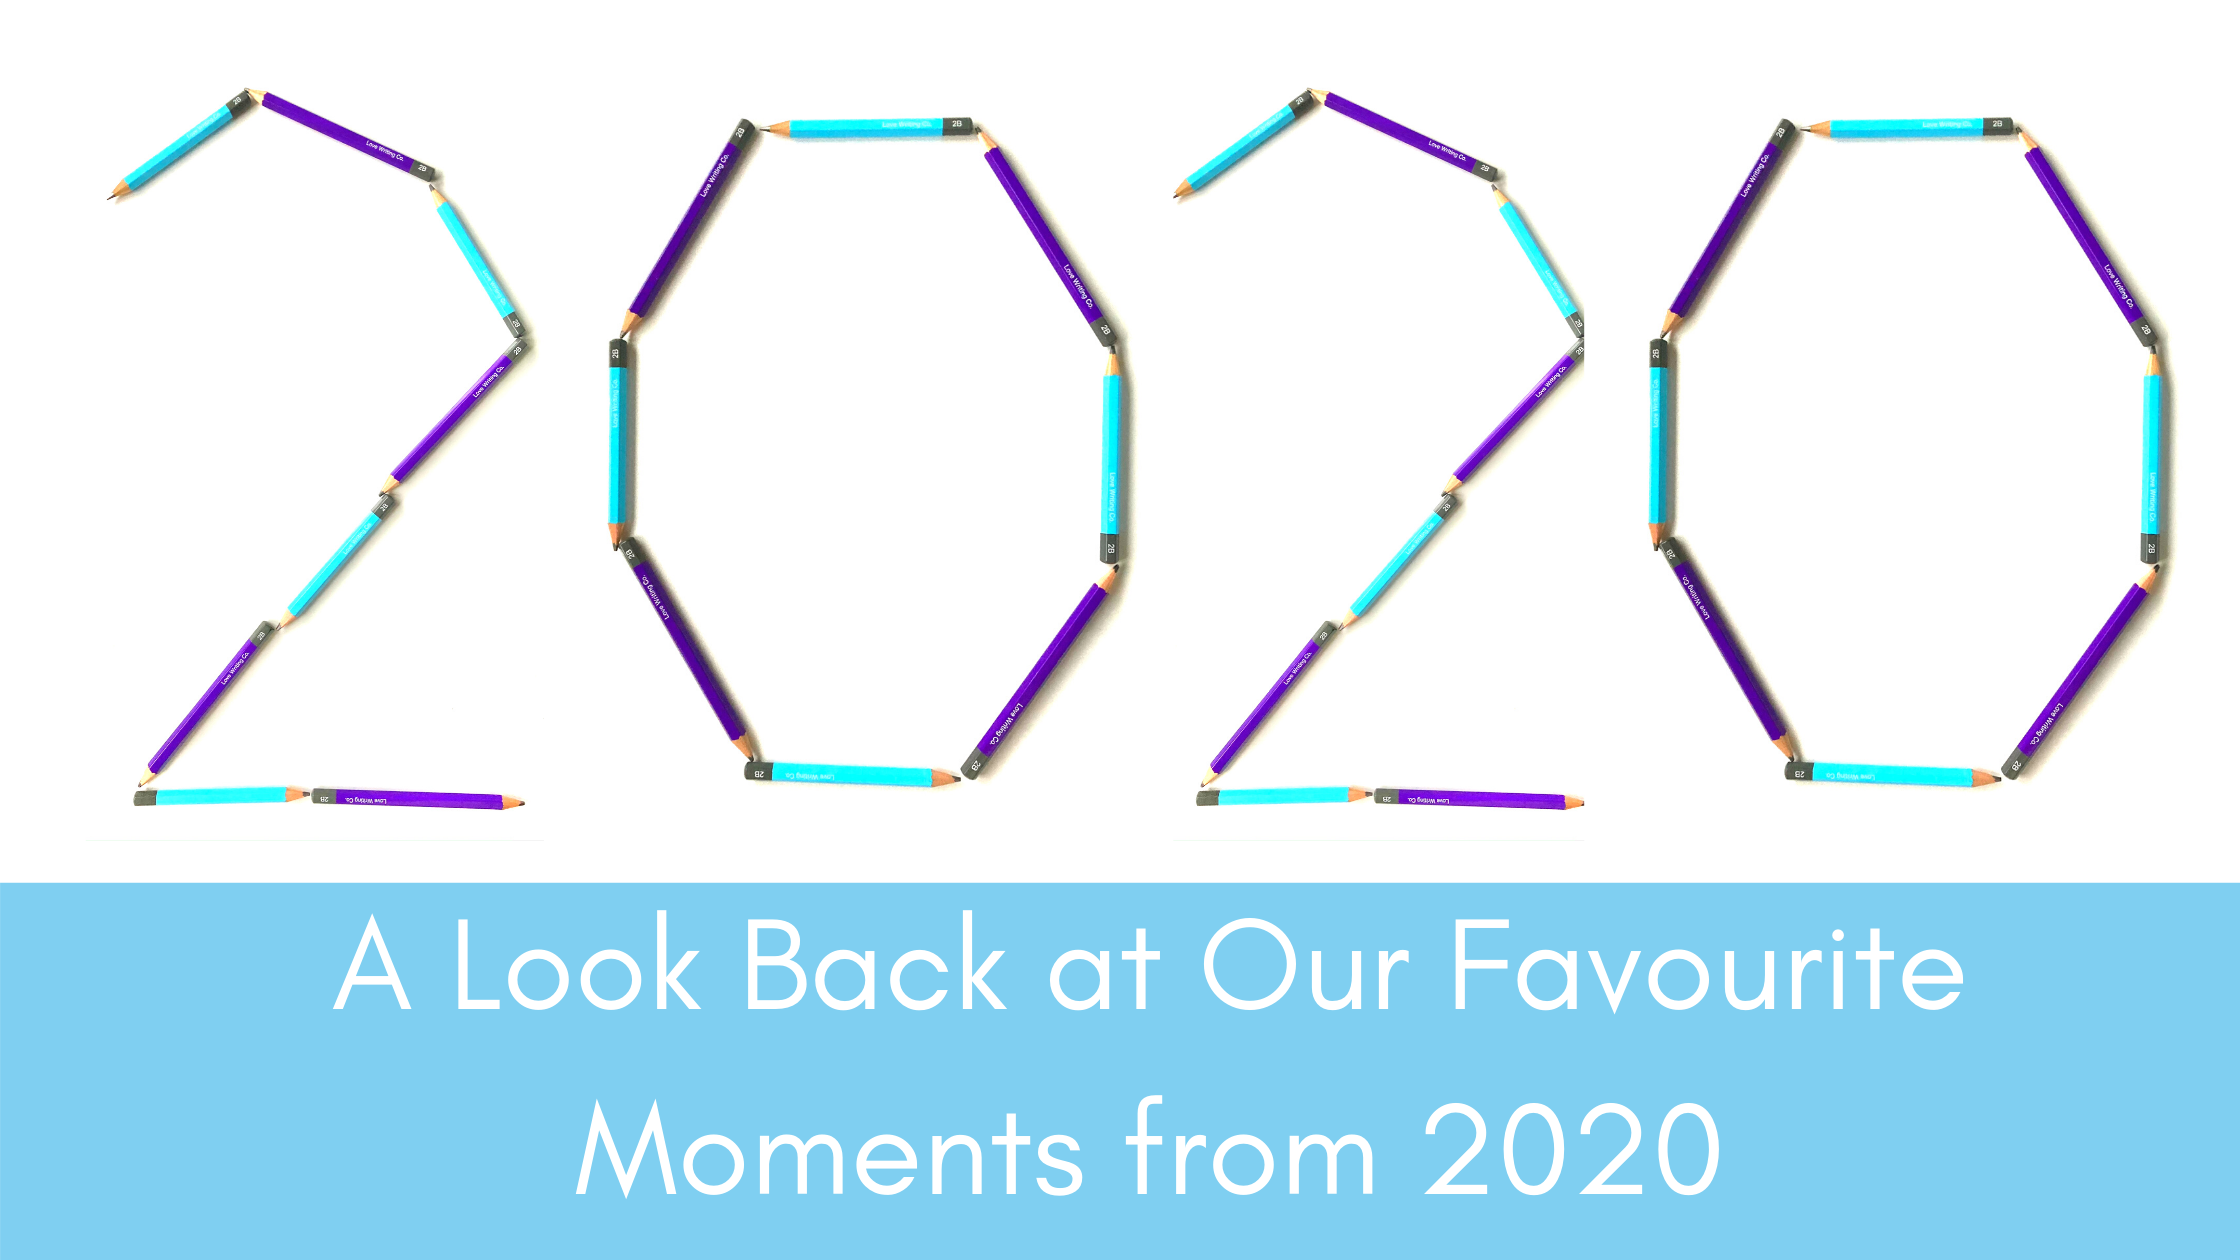 A Look Back at Our Favourite Moments from 2020